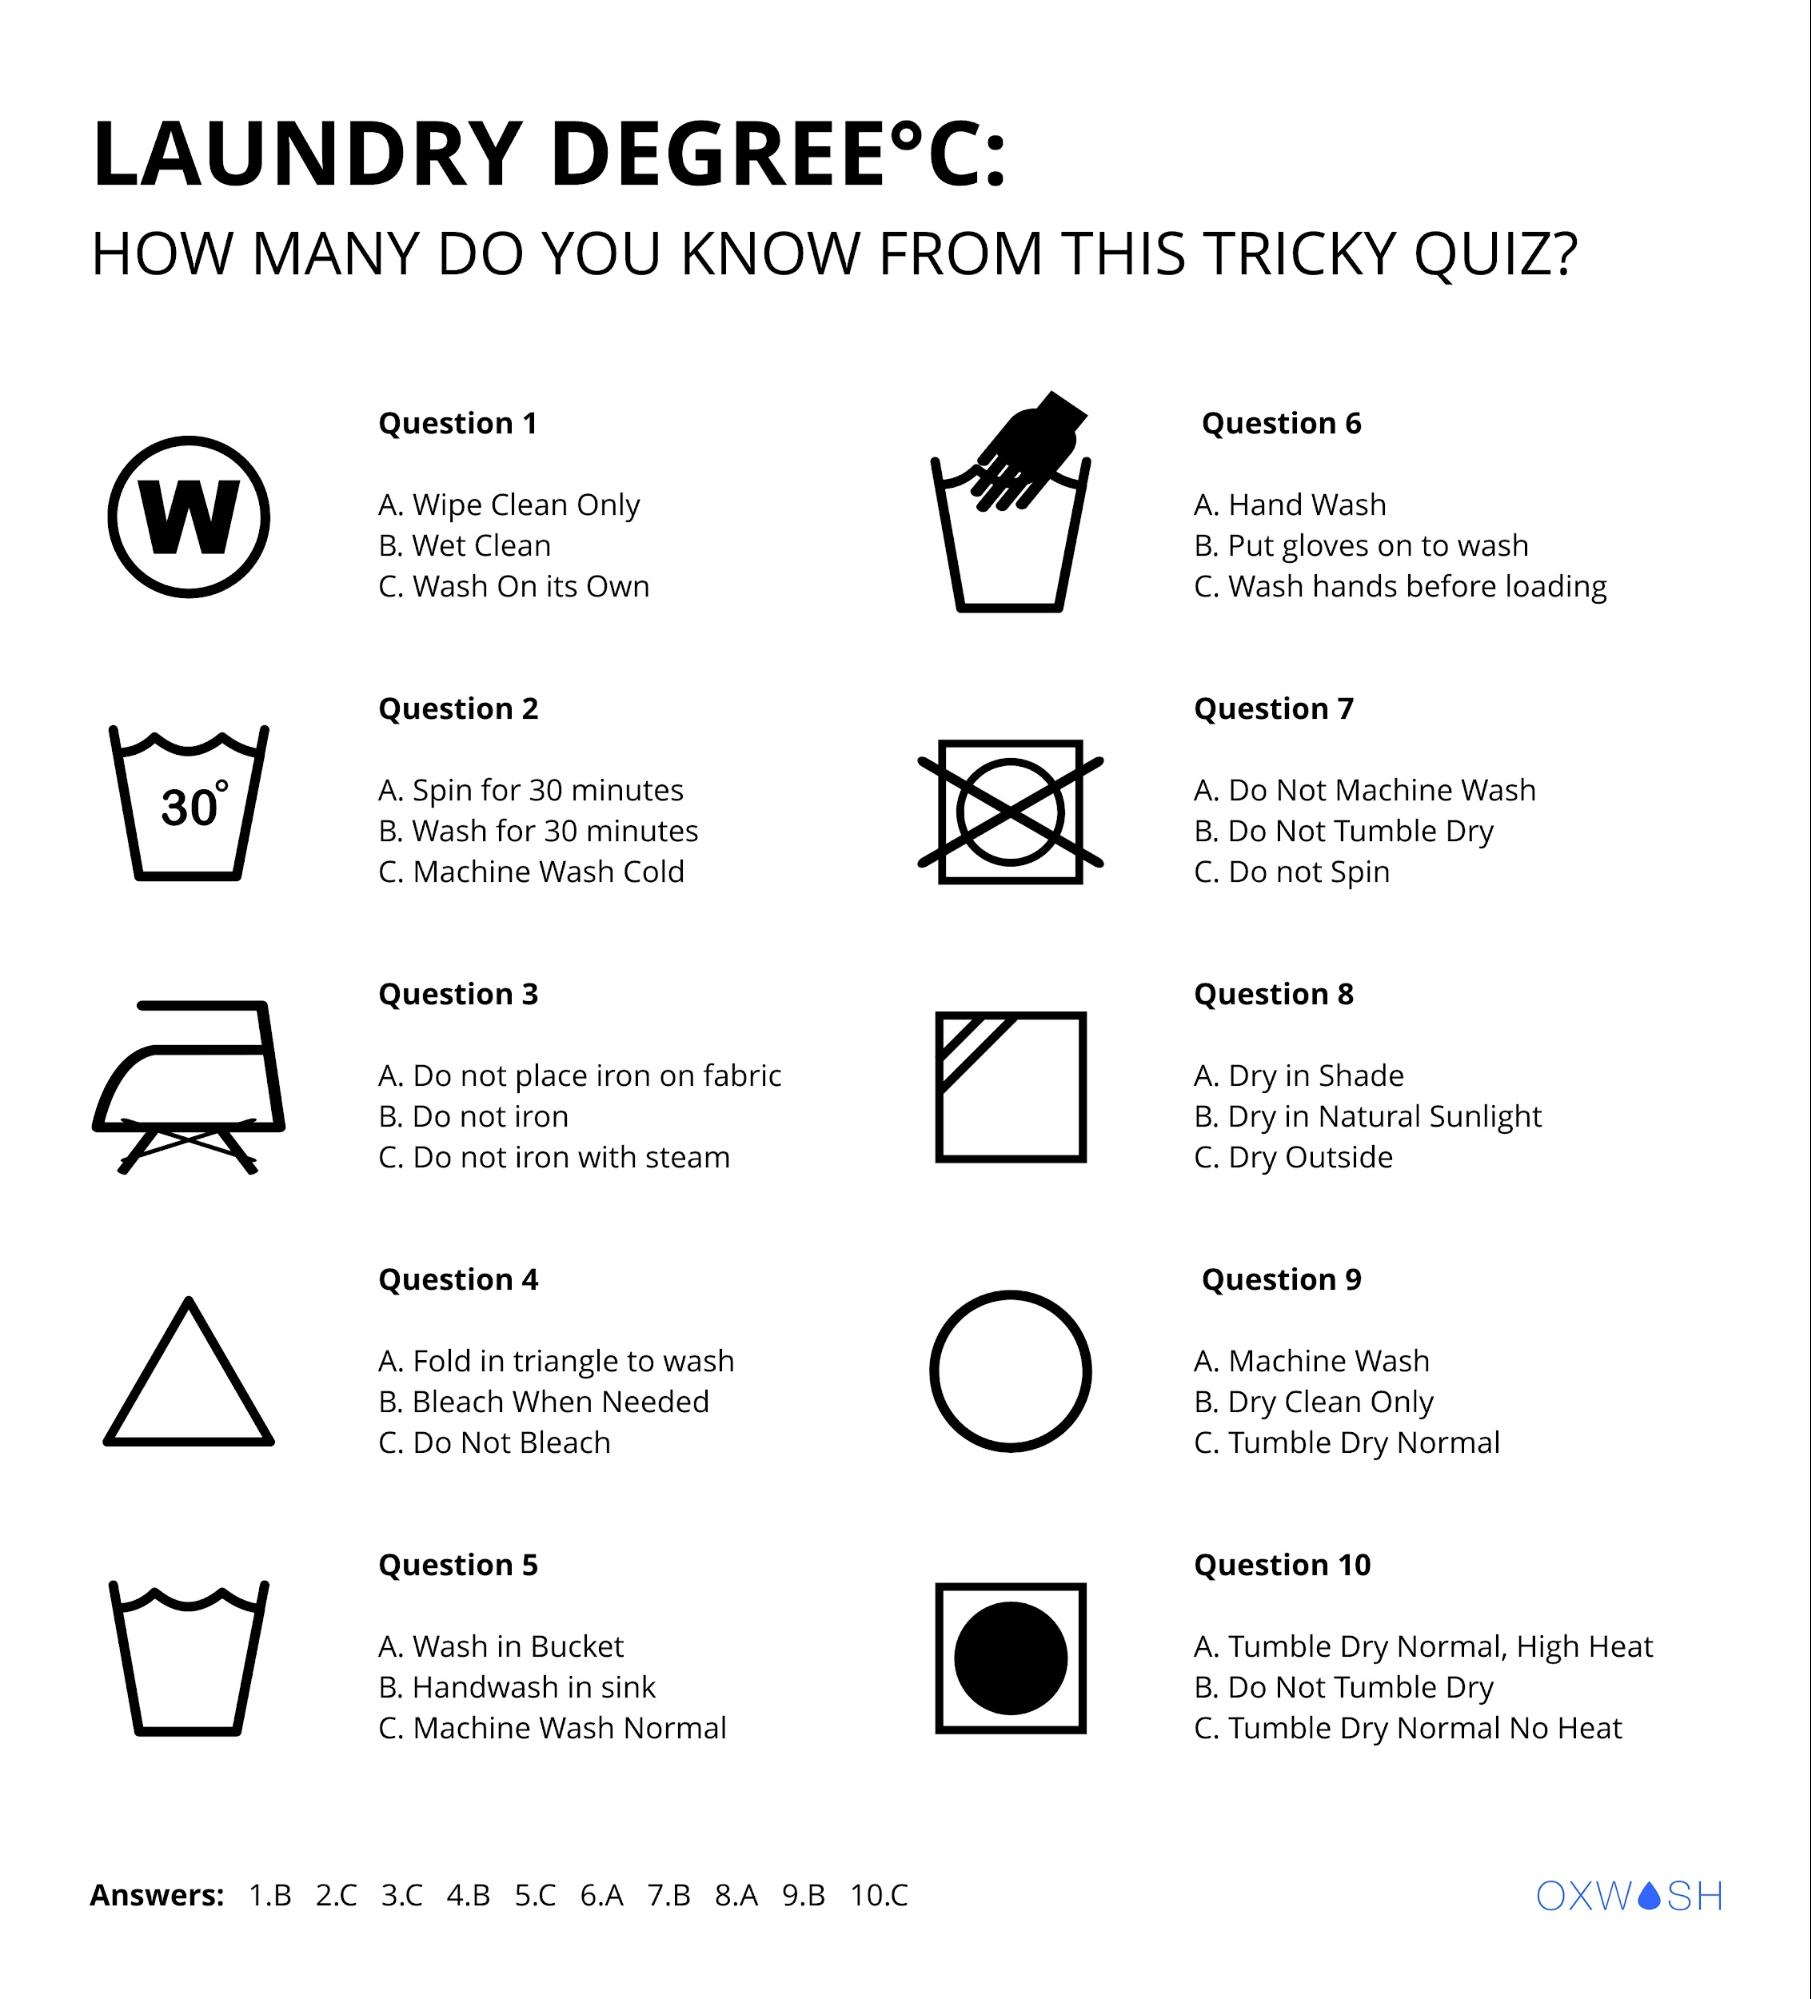 Tumble Dry Meaning Explained & When to Do it